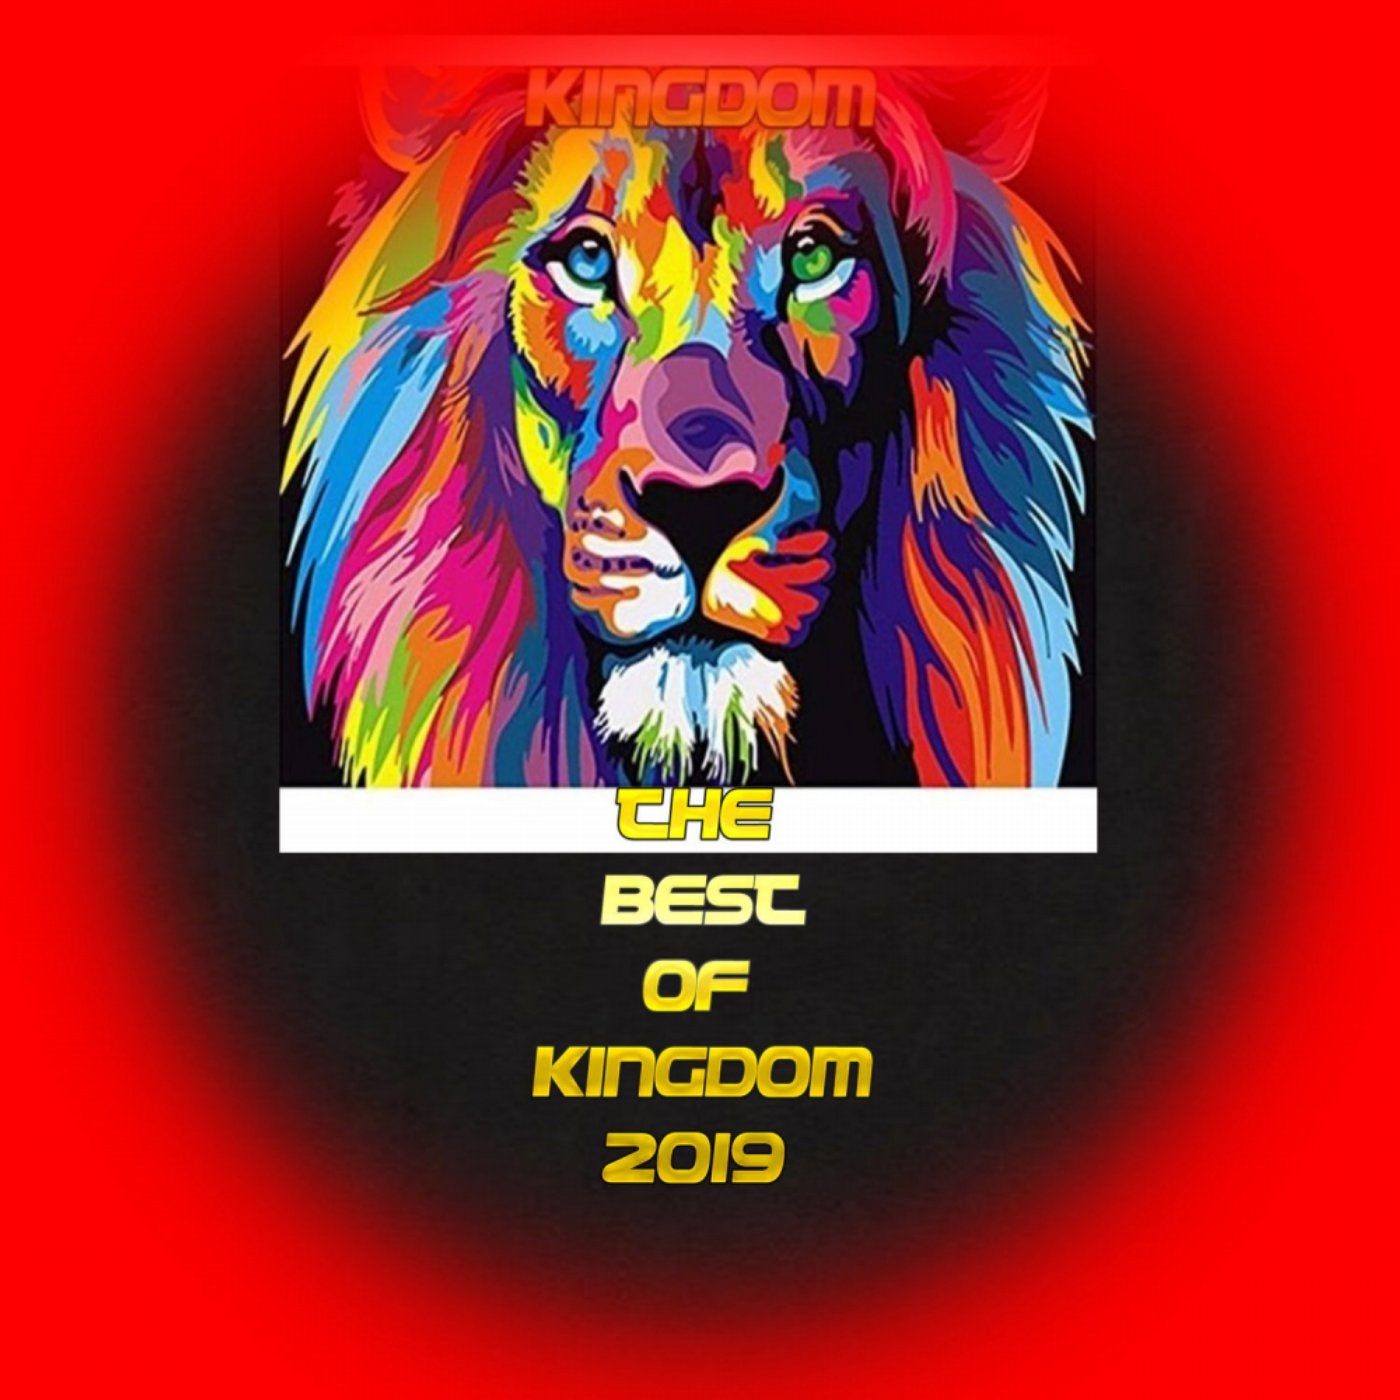 The Best of Kingdom 2019